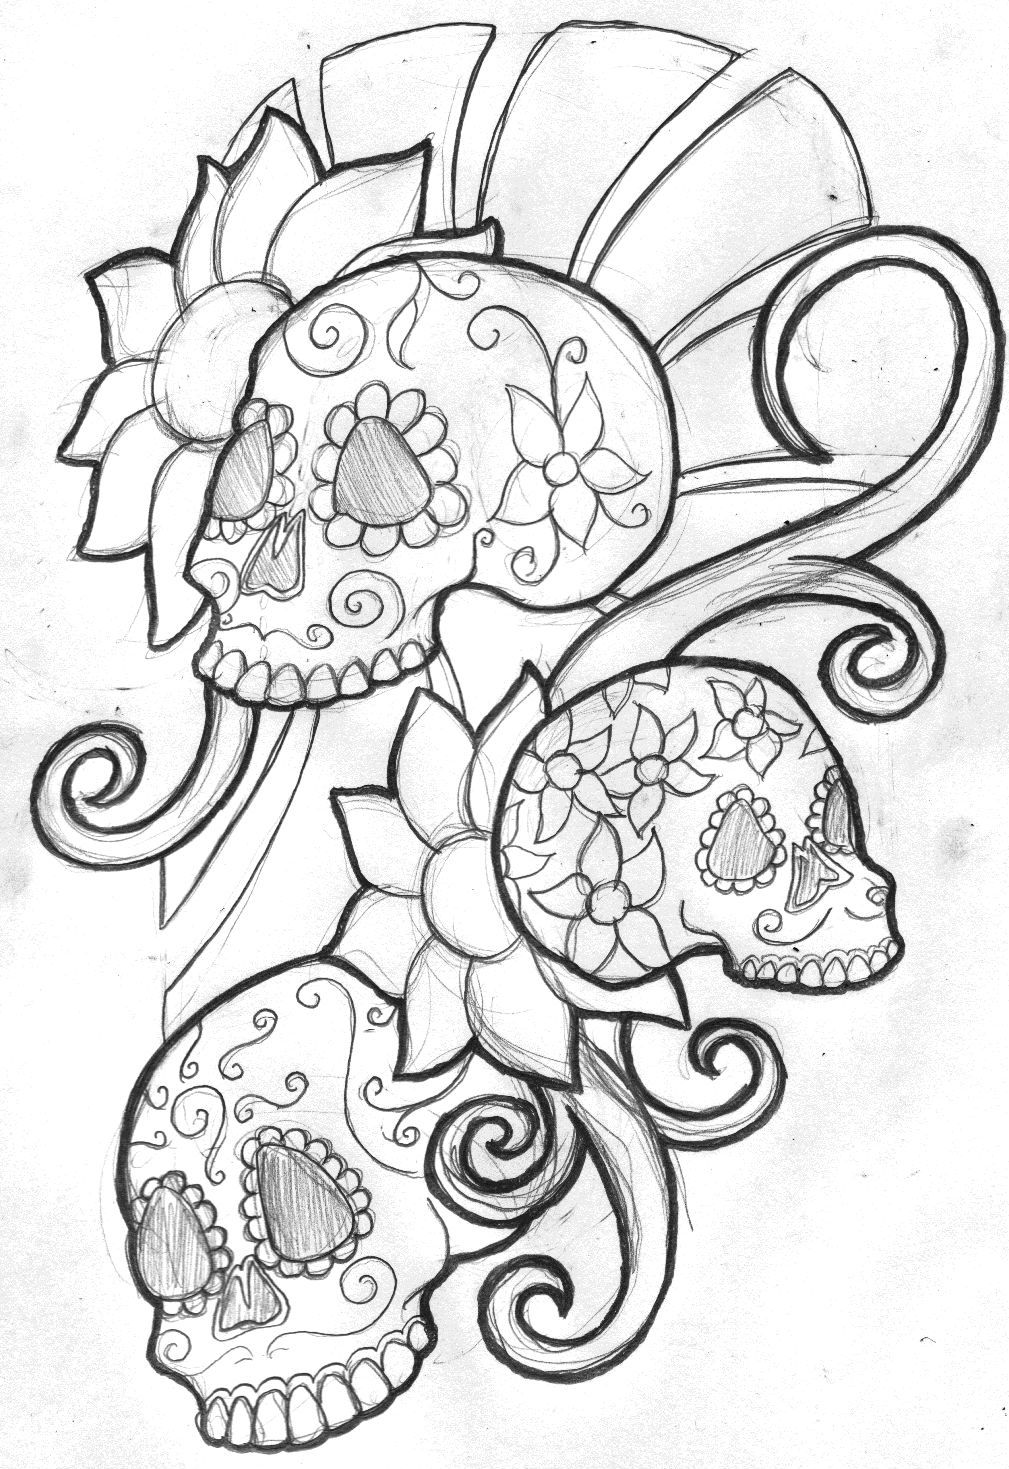 11 Pics of Coloring Pages Sugar Skull Art - Day of Dead Sugar ...